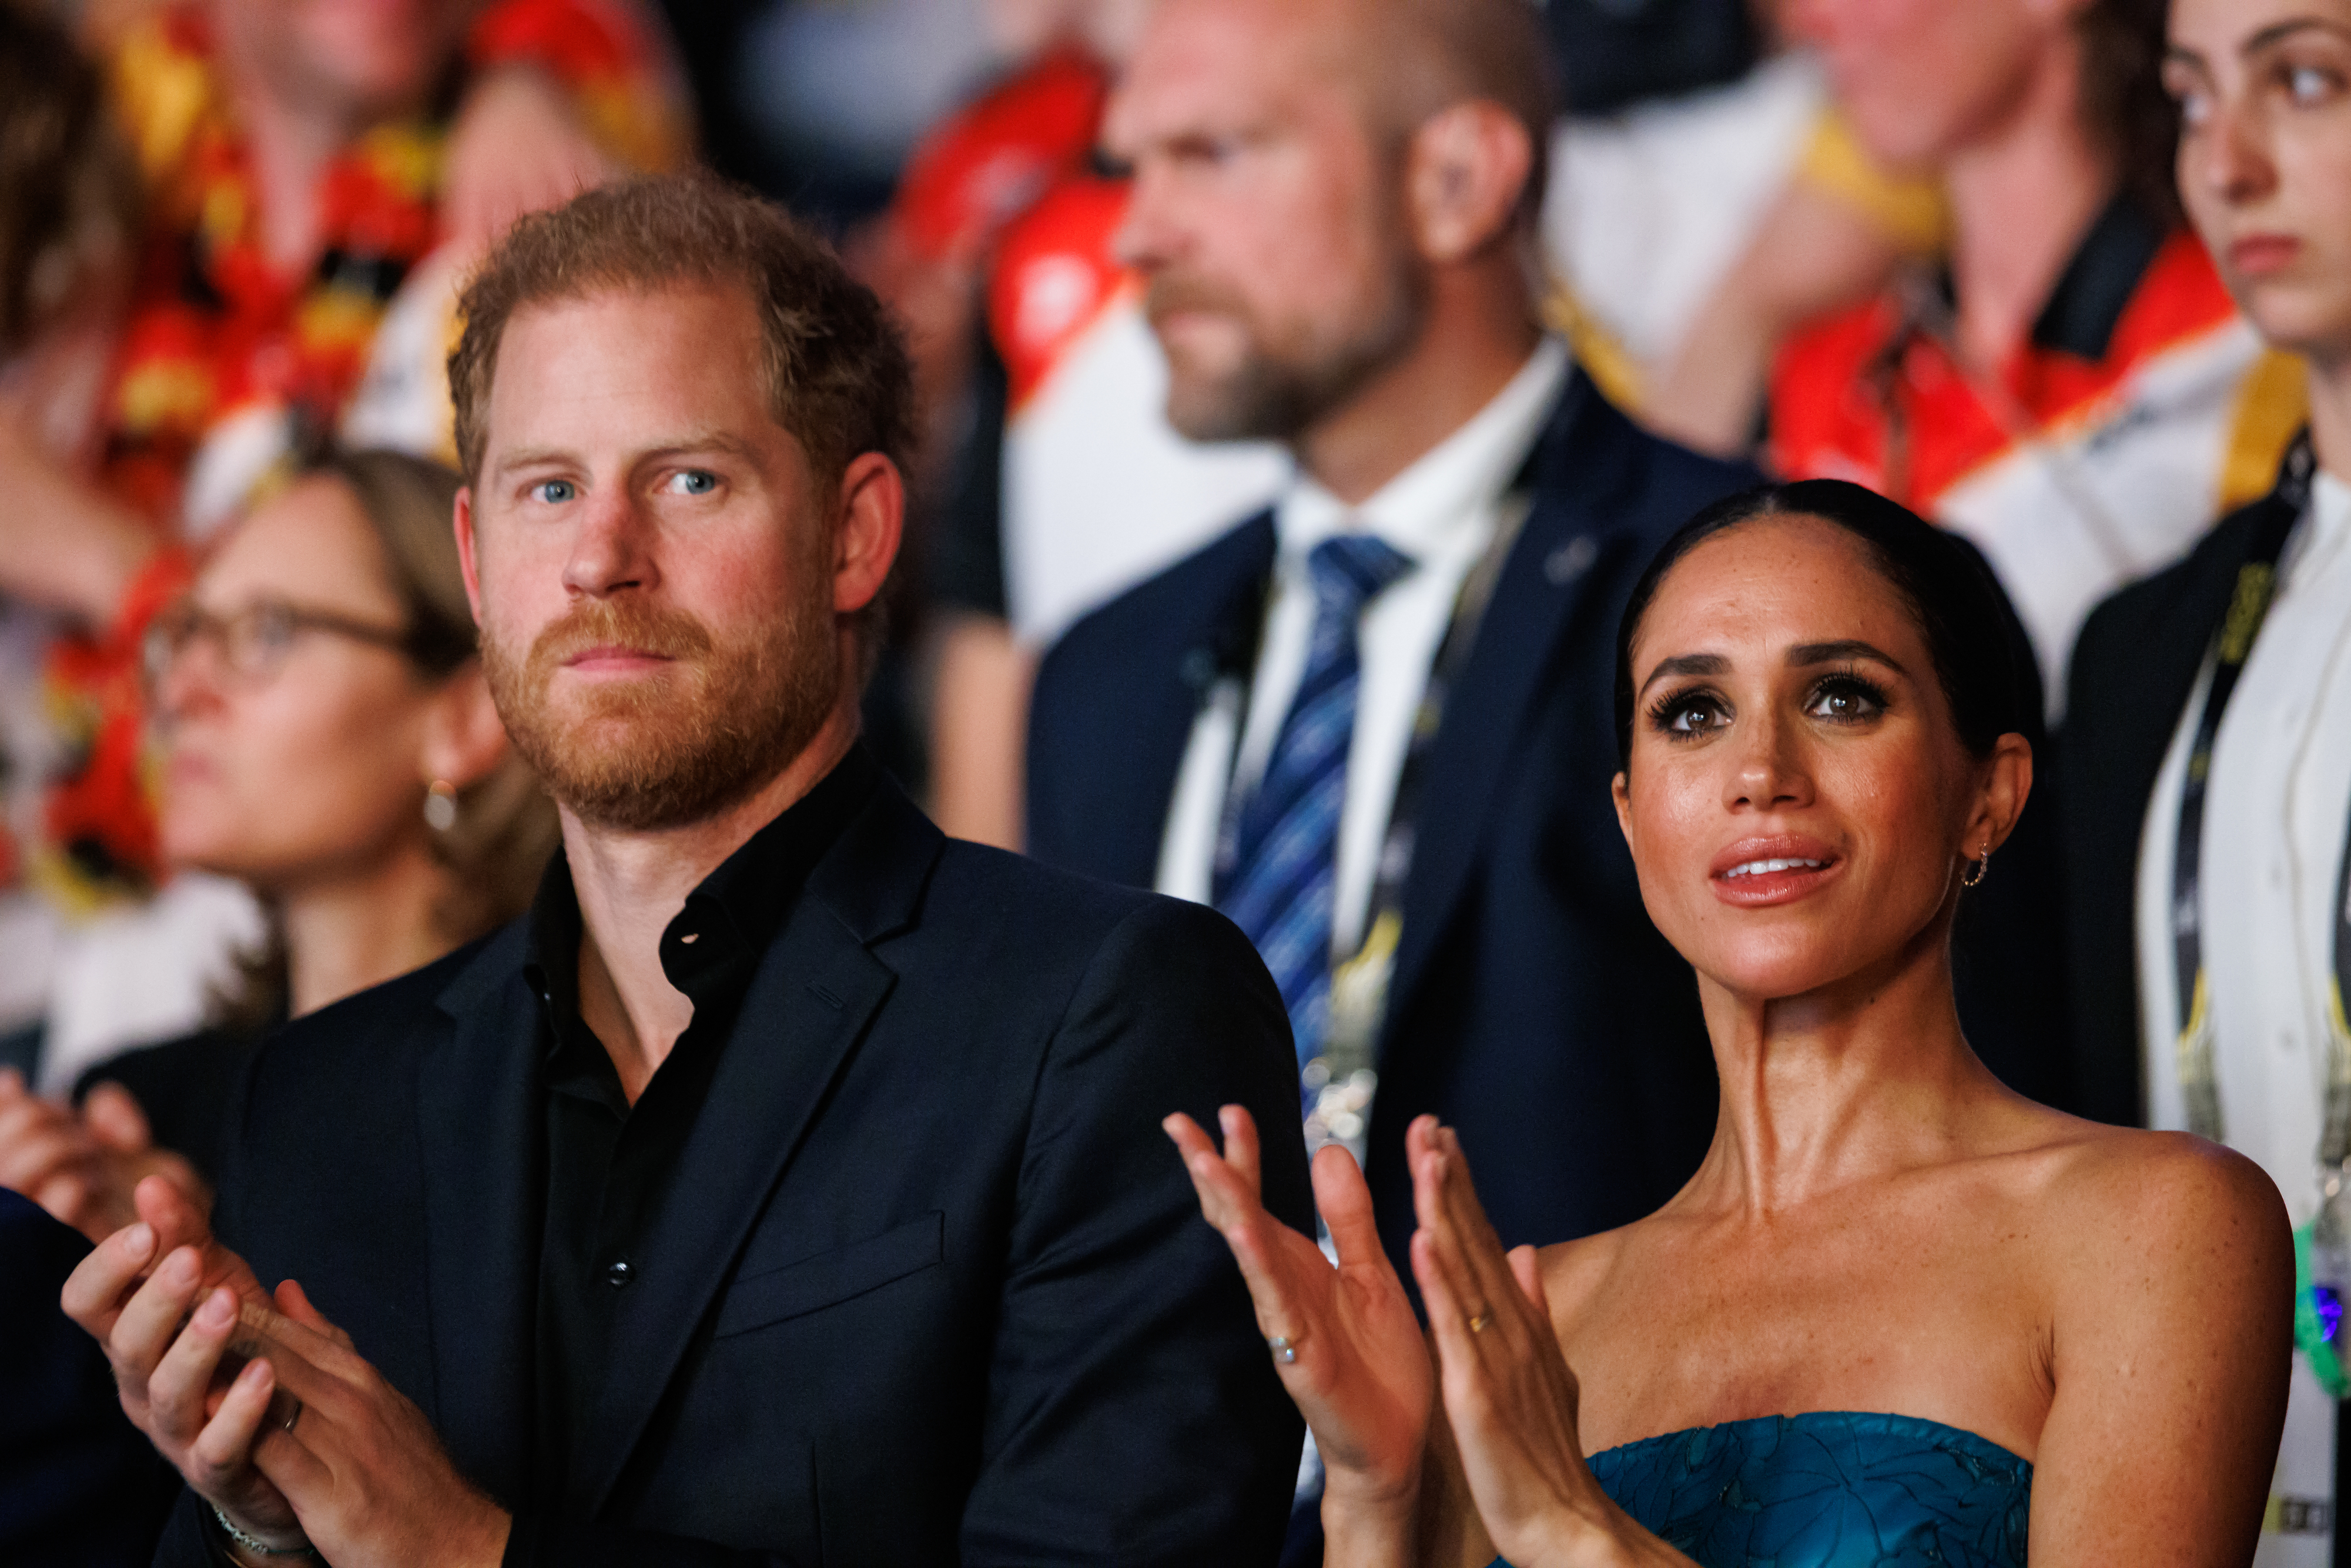 Prince Harry and Meghan Markle seated, clapping, Meghan in a strapless top